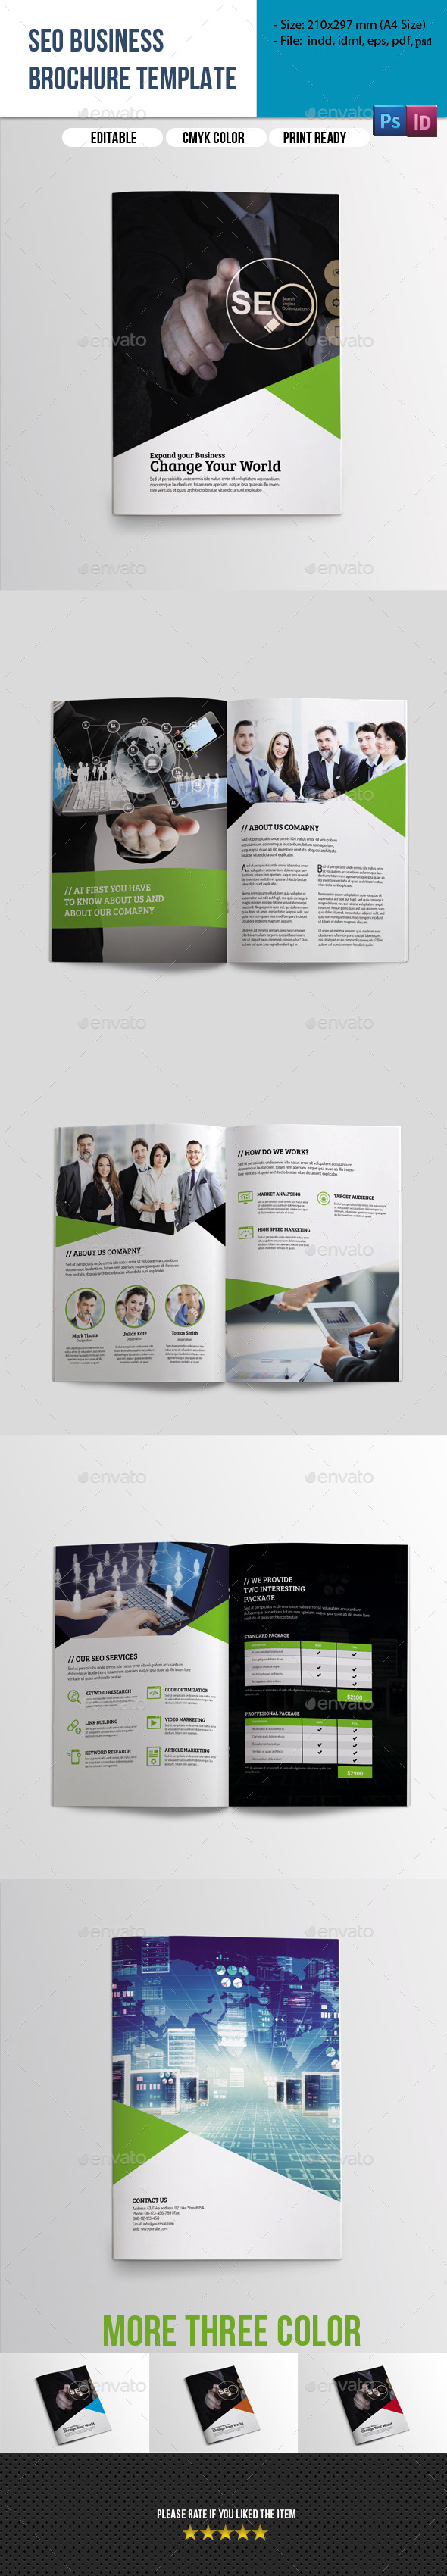 8 Pages SEO Business Brochure